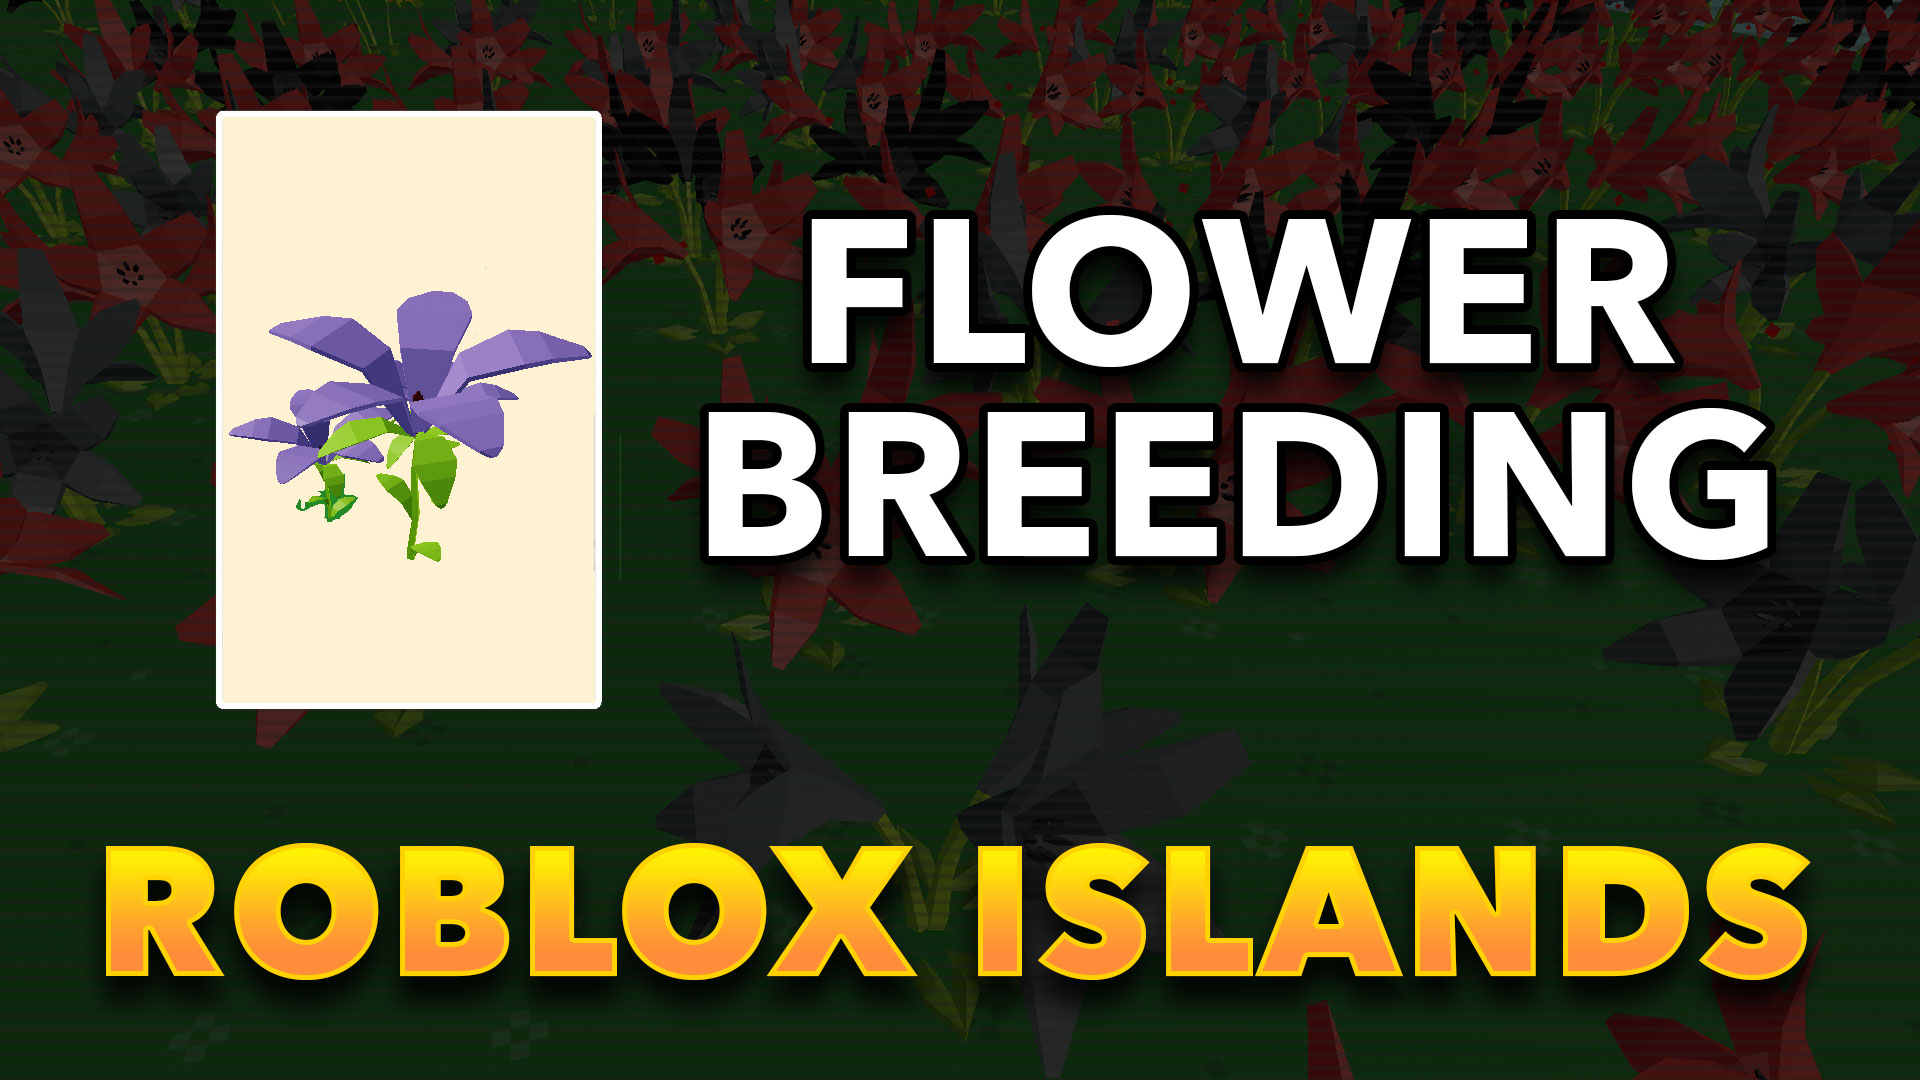 Roblox Islands Flower Breeding Tips And Tricks Thoroughly Tested - diffrent key combponations for roblox